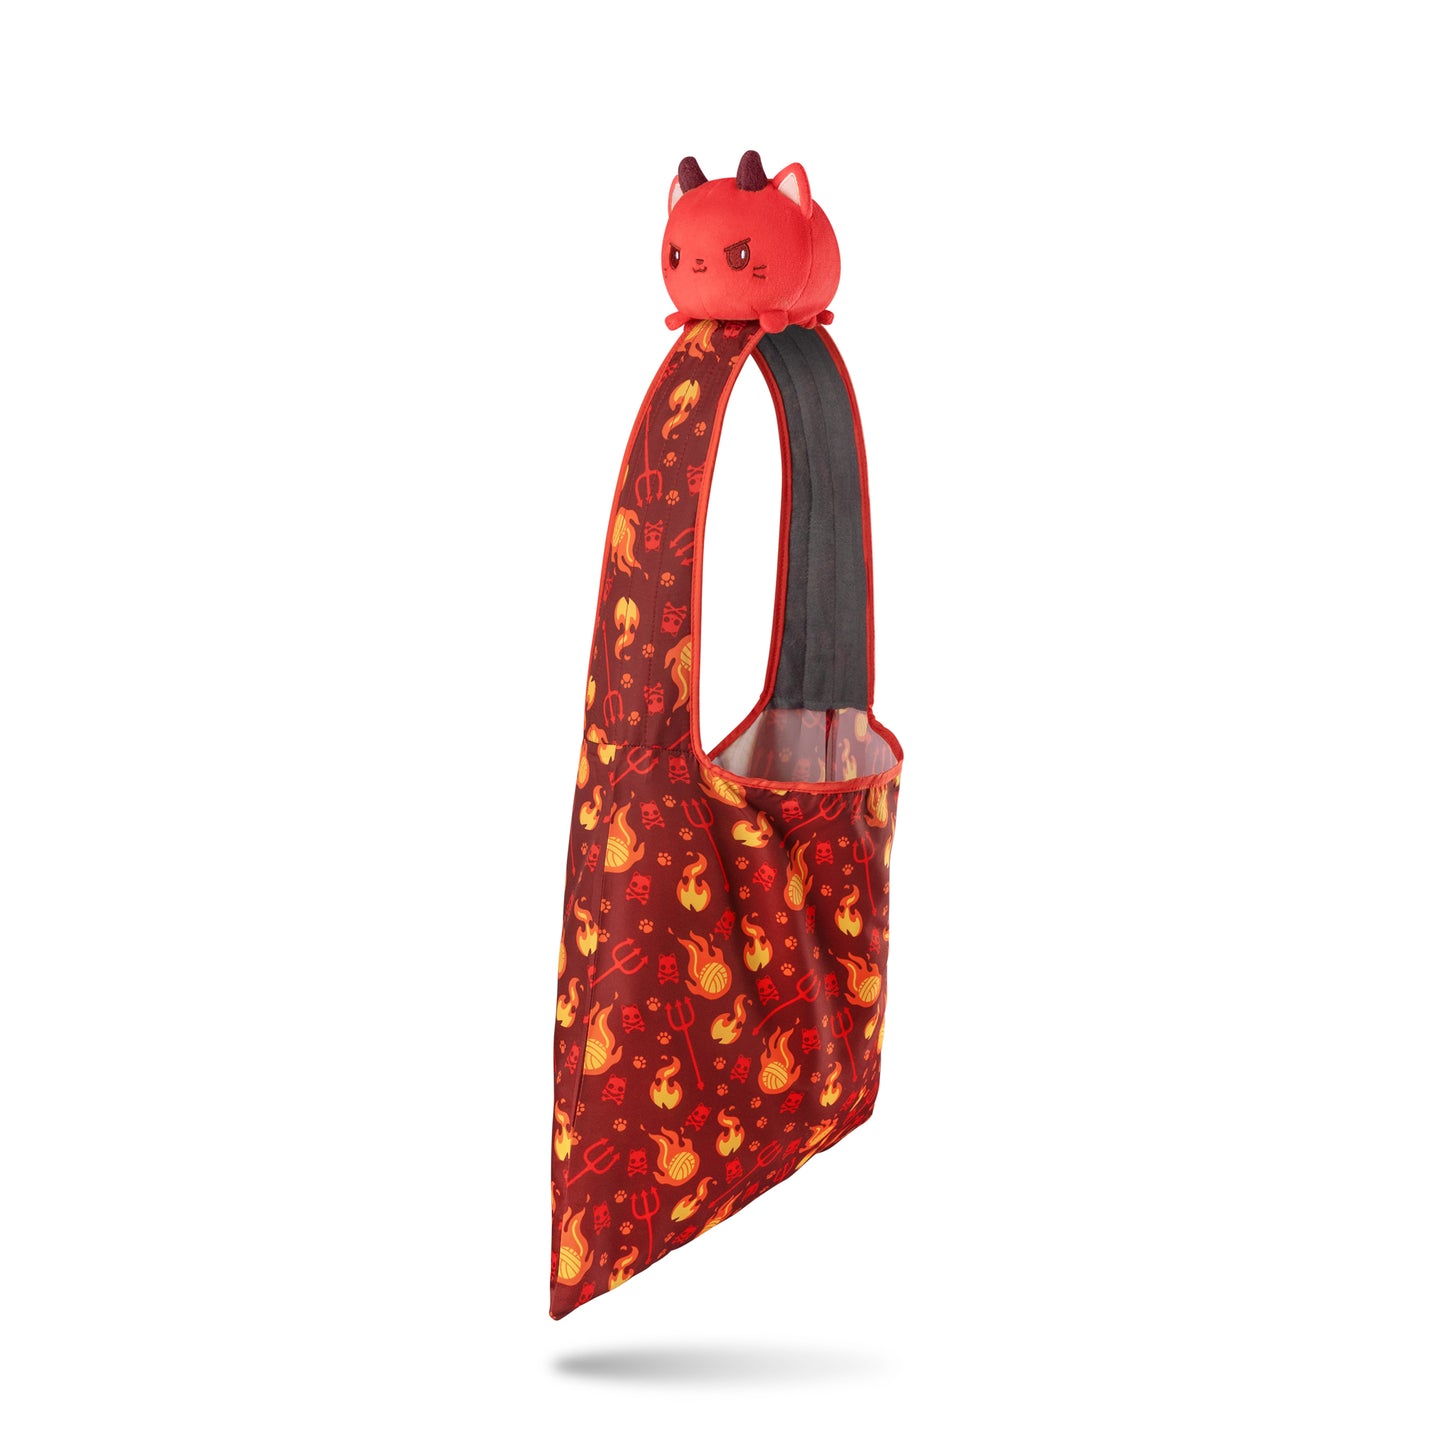 A red bib with a devil on it, perfect for any TeeTurtle fan.
Product: Plushiverse Devilish Kitty Plushie Tote Bag
Brand: TeeTurtle